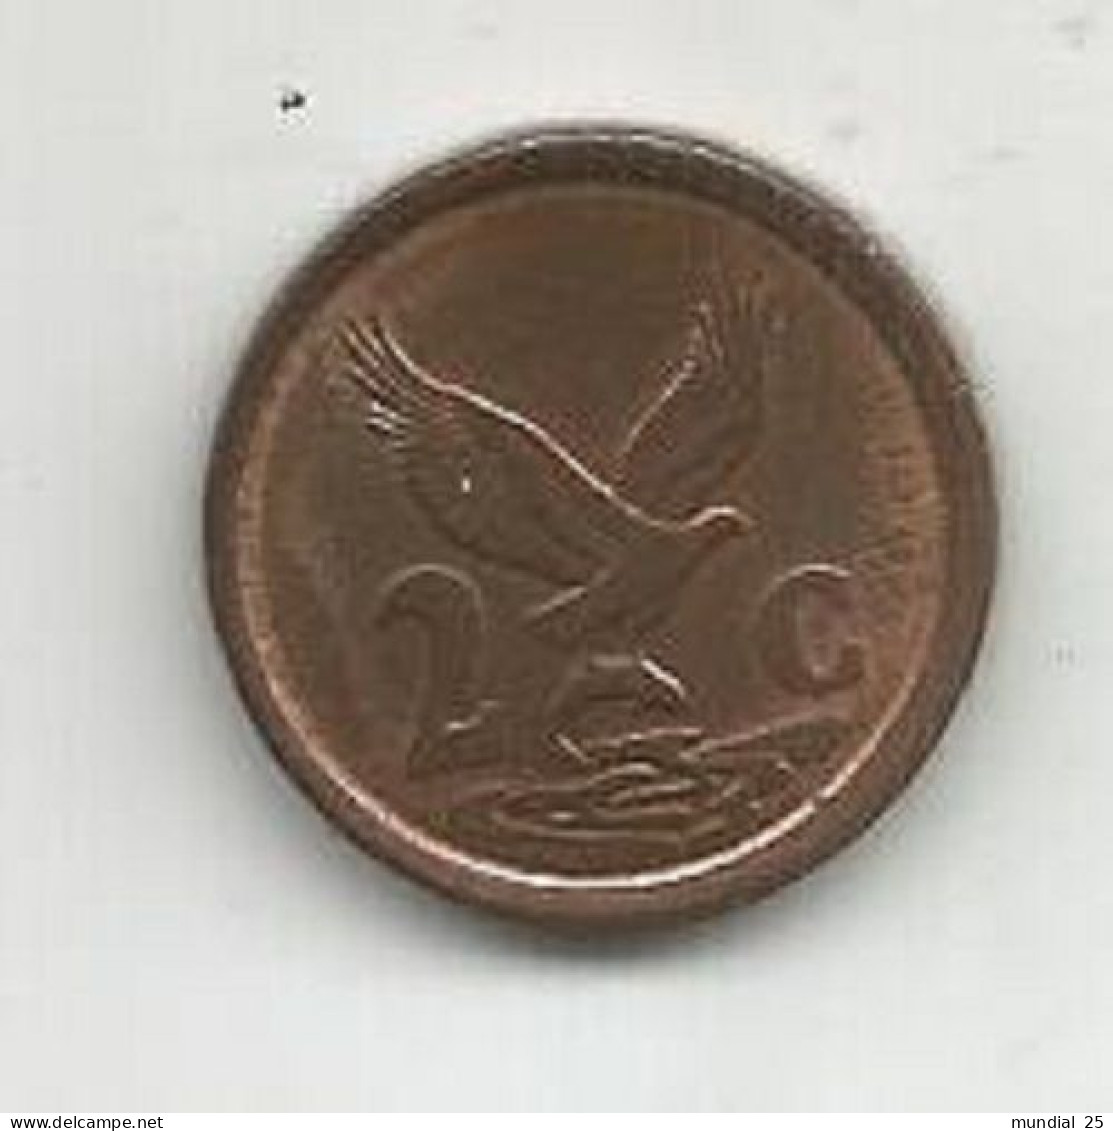 SOUTH AFRICA 2 CENTS 1991 - Sud Africa